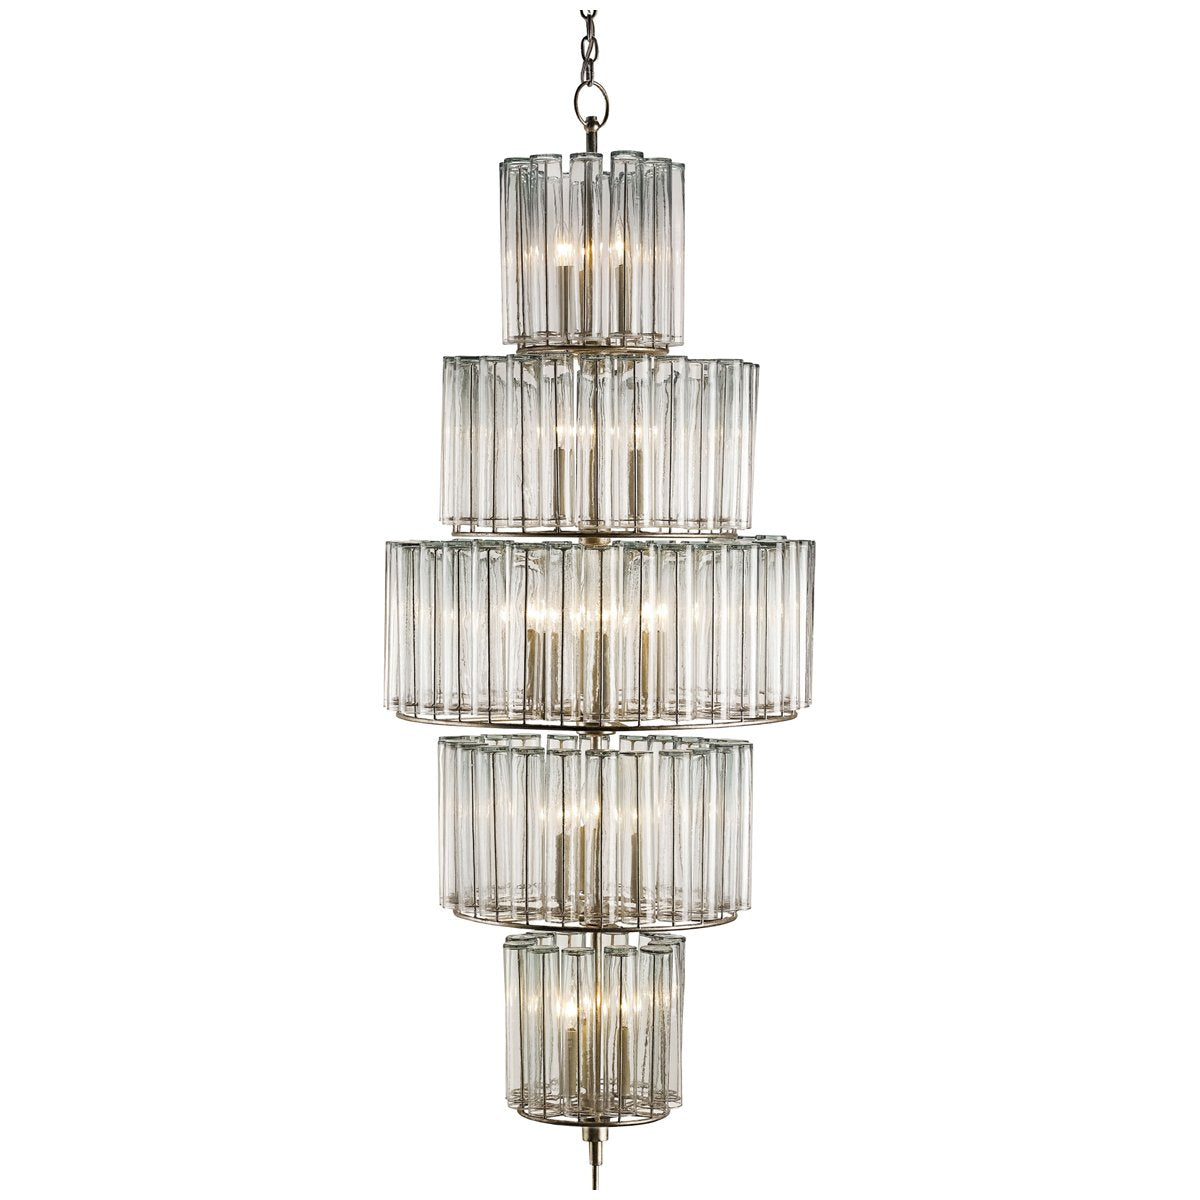 Currey and Company Bevilacqua Large Chandelier